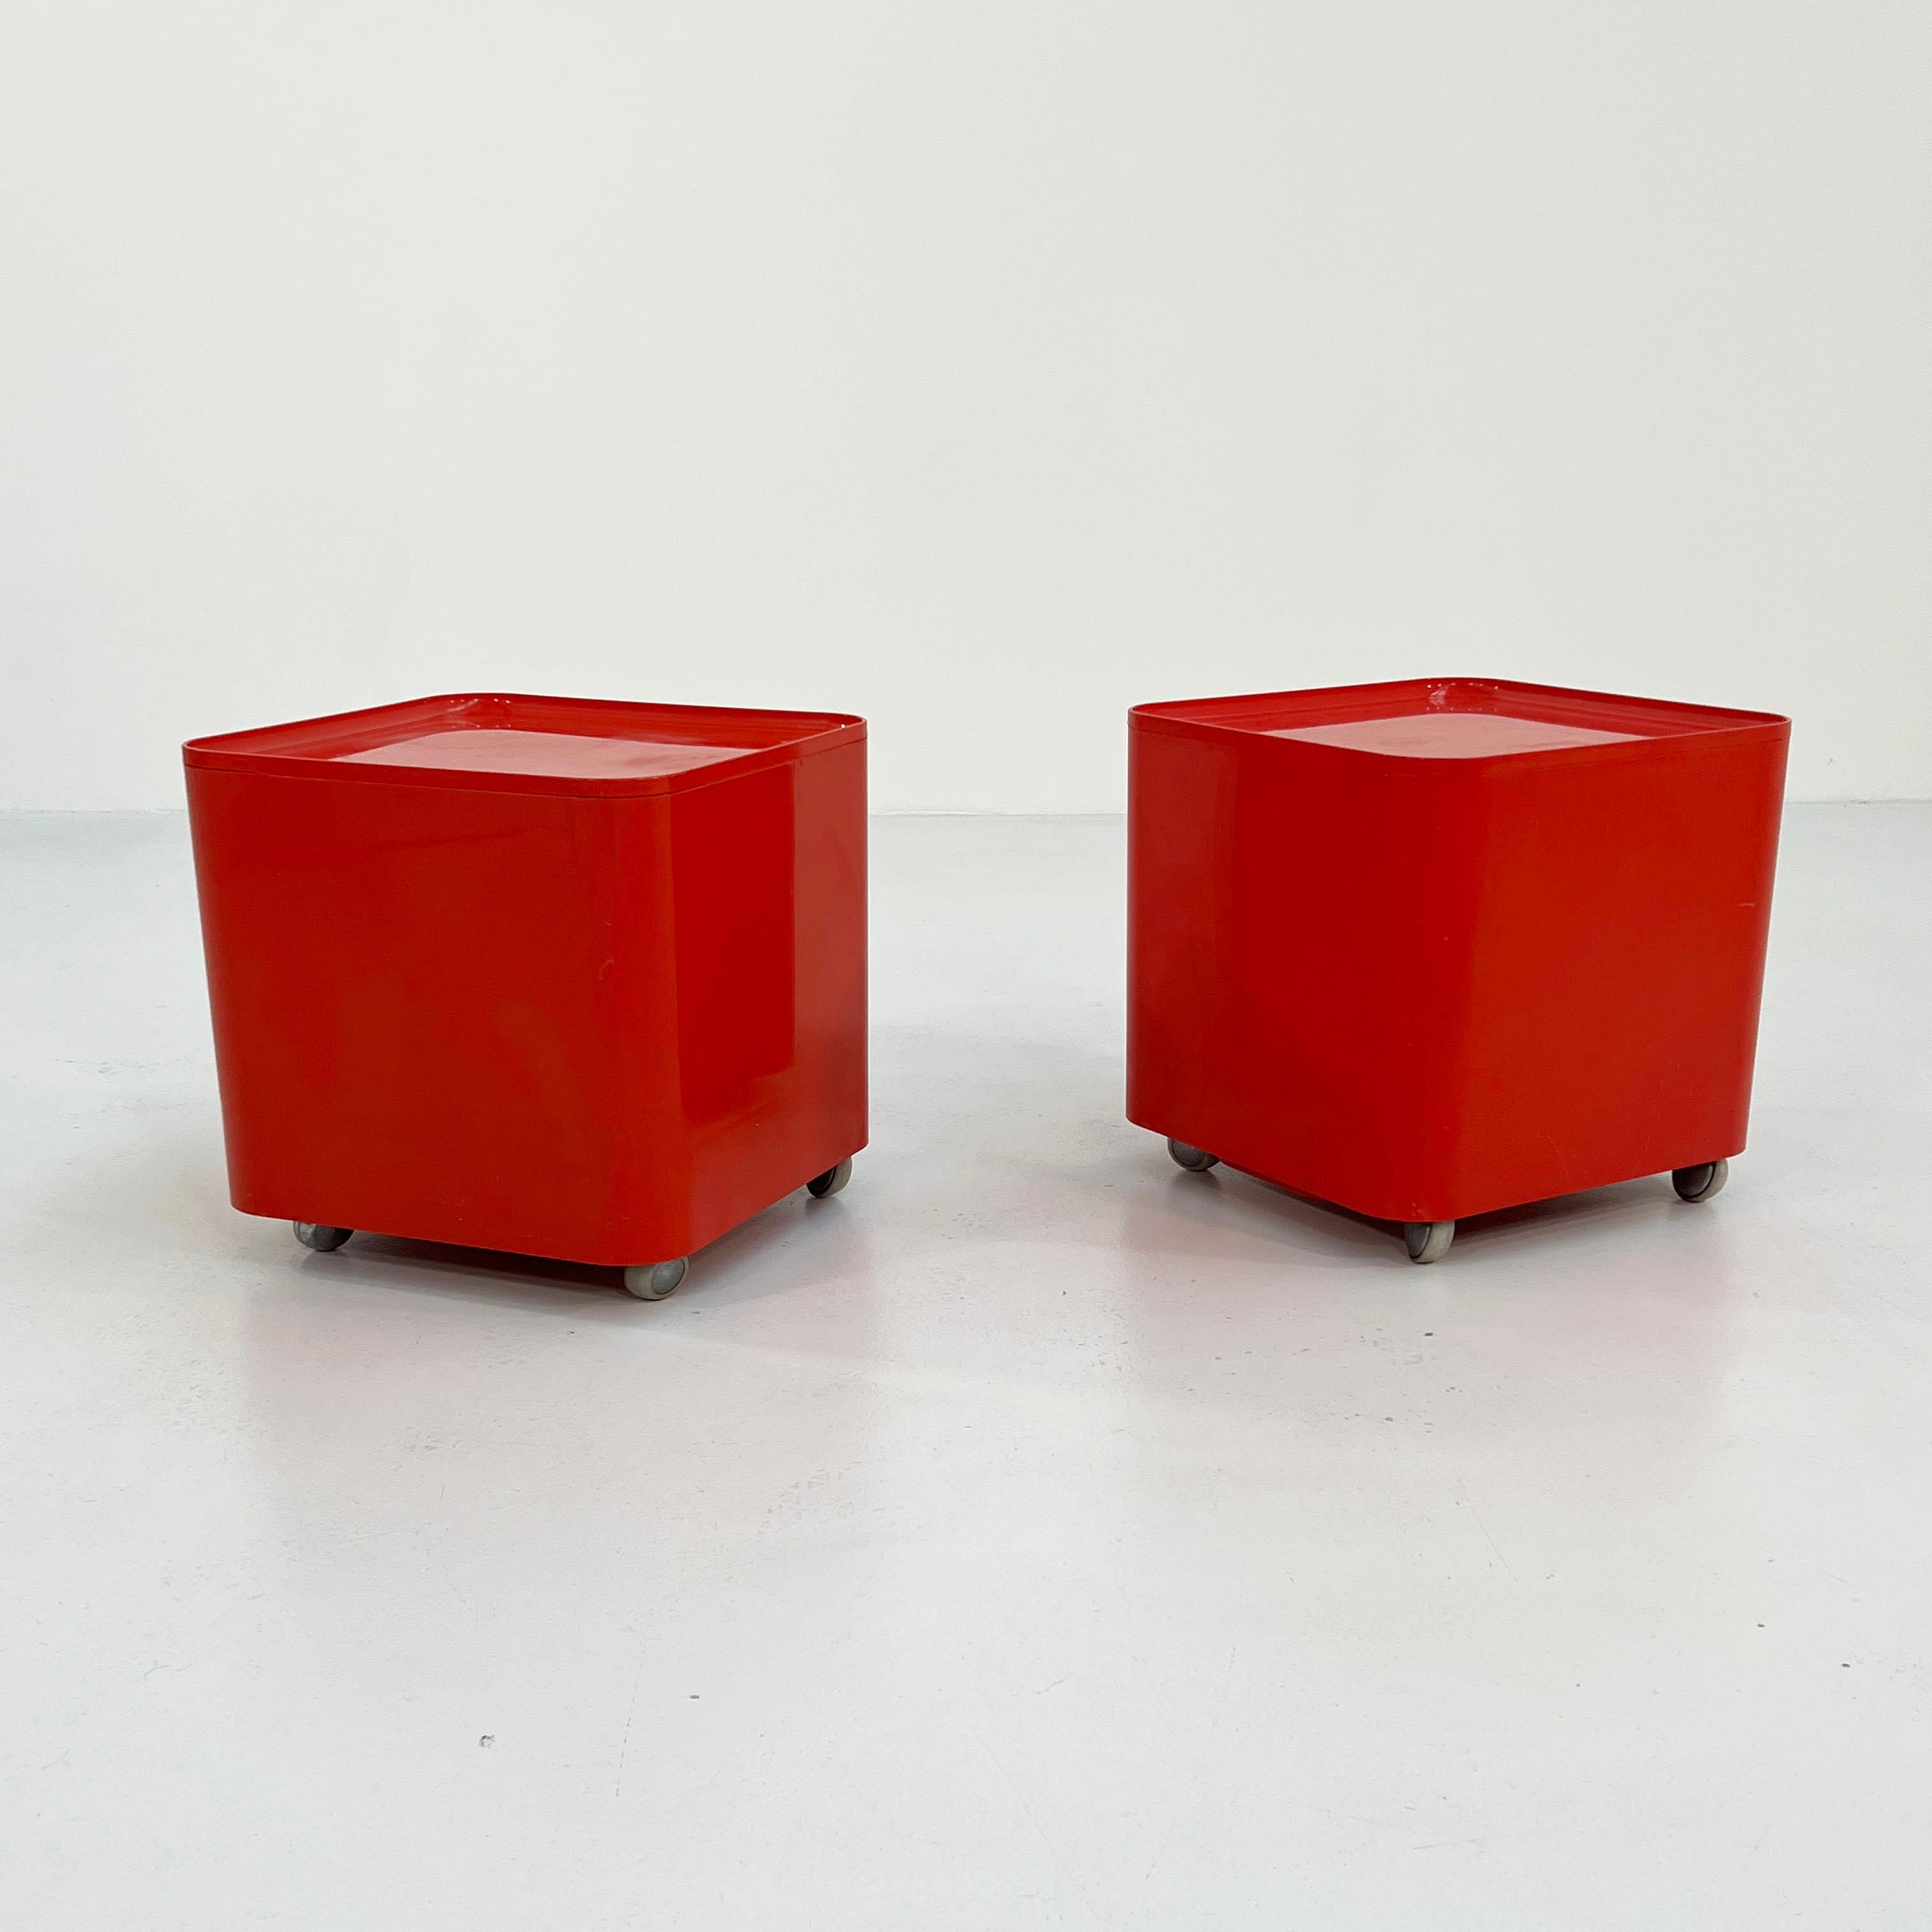 Late 20th Century Dime Side Table/Trolley on Wheels by Marcello Siard for Longato, 1970s